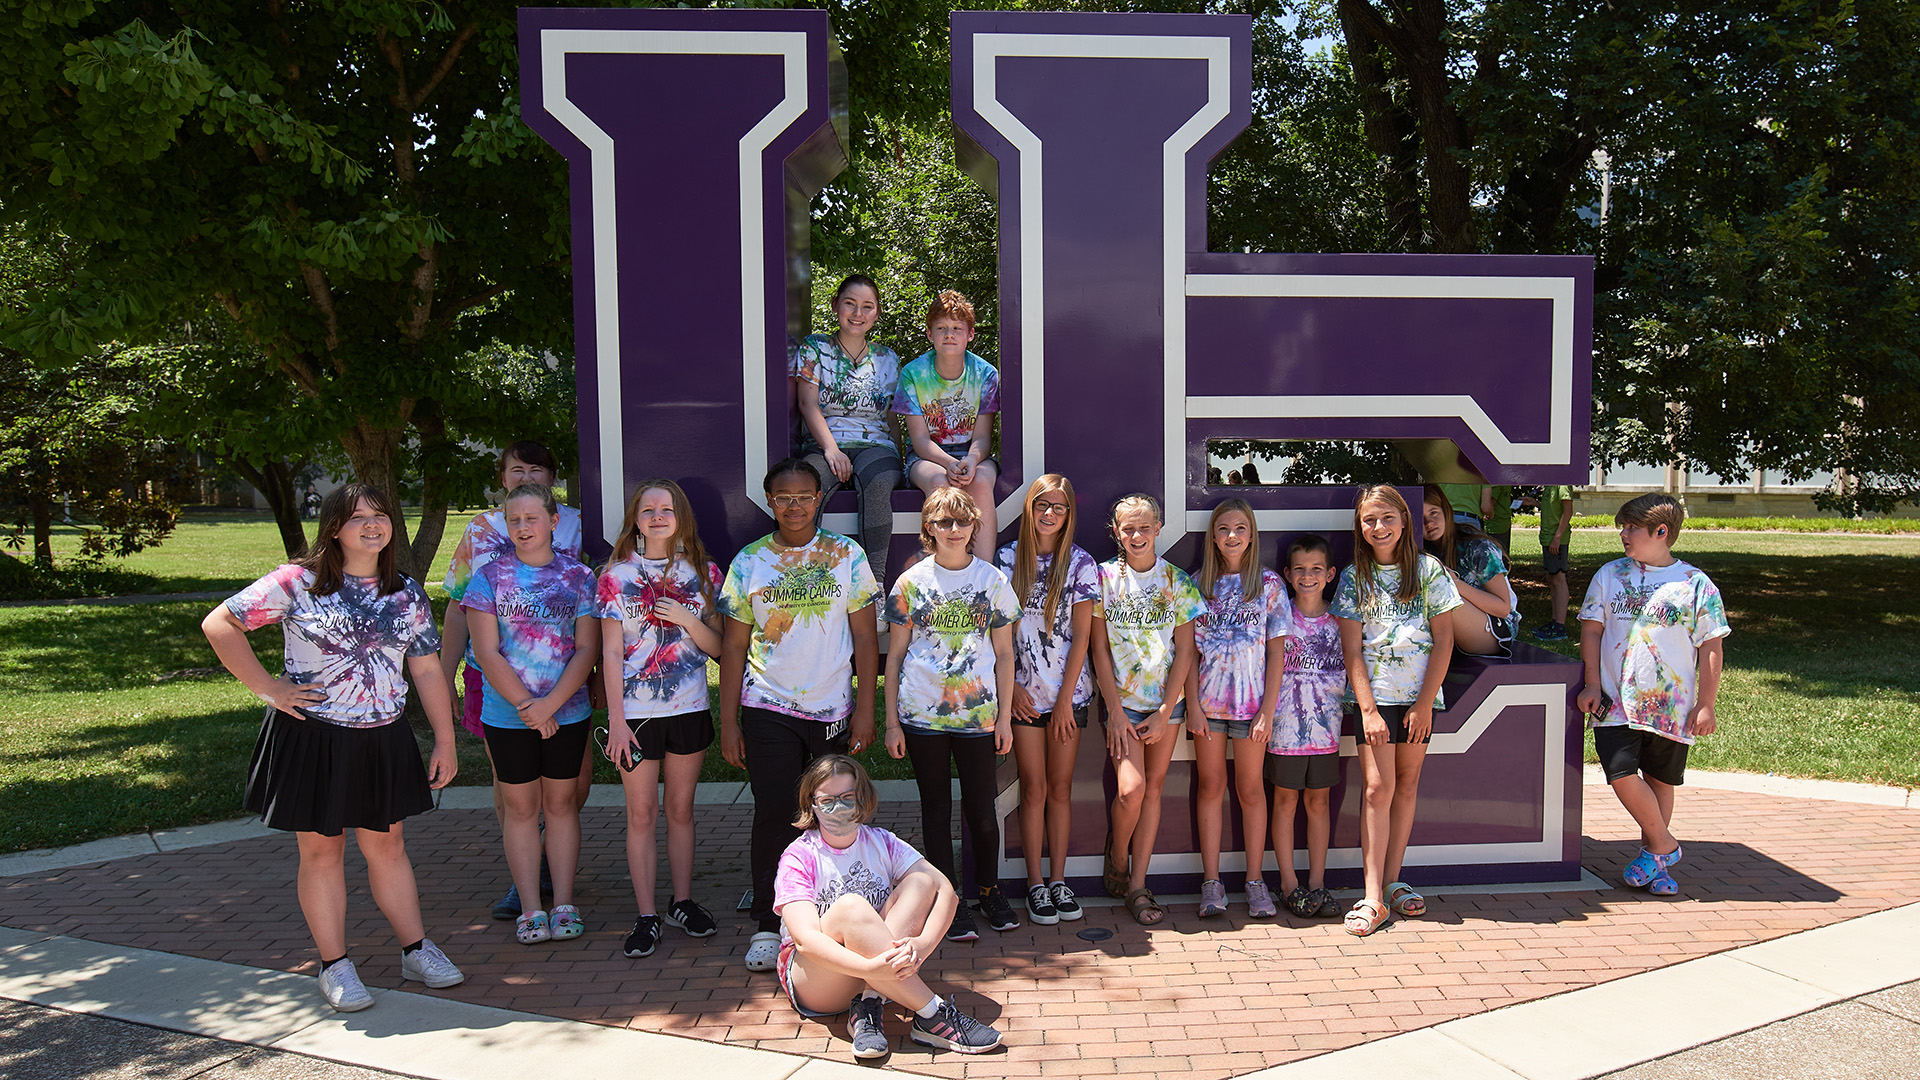 Art Camp students in front of UE letters sign